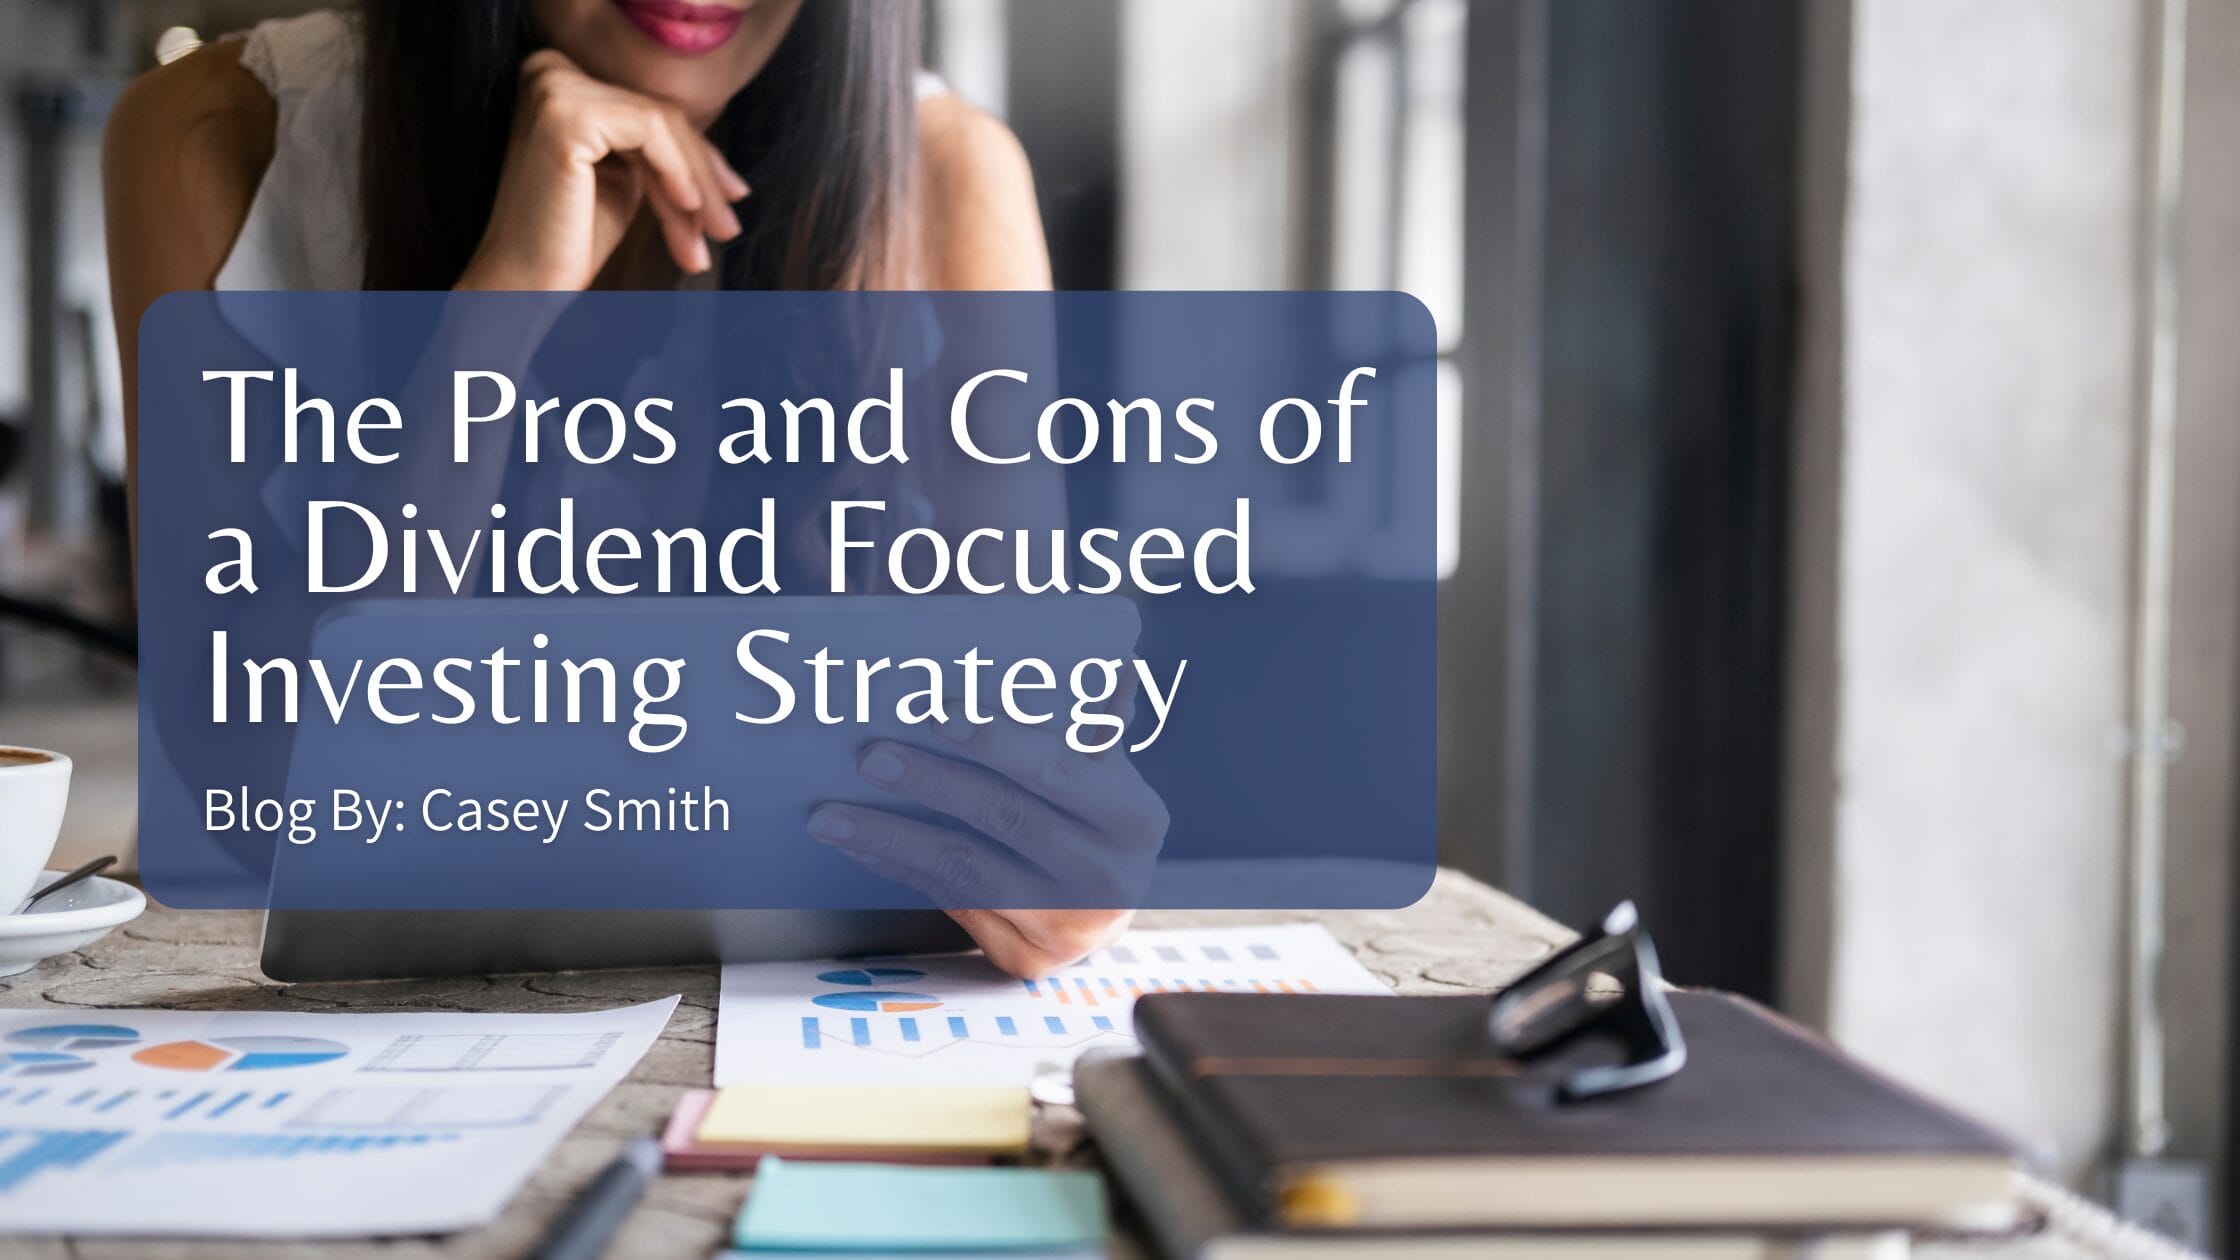 The Pros and Cons of a Dividend Focused Investing Strategy